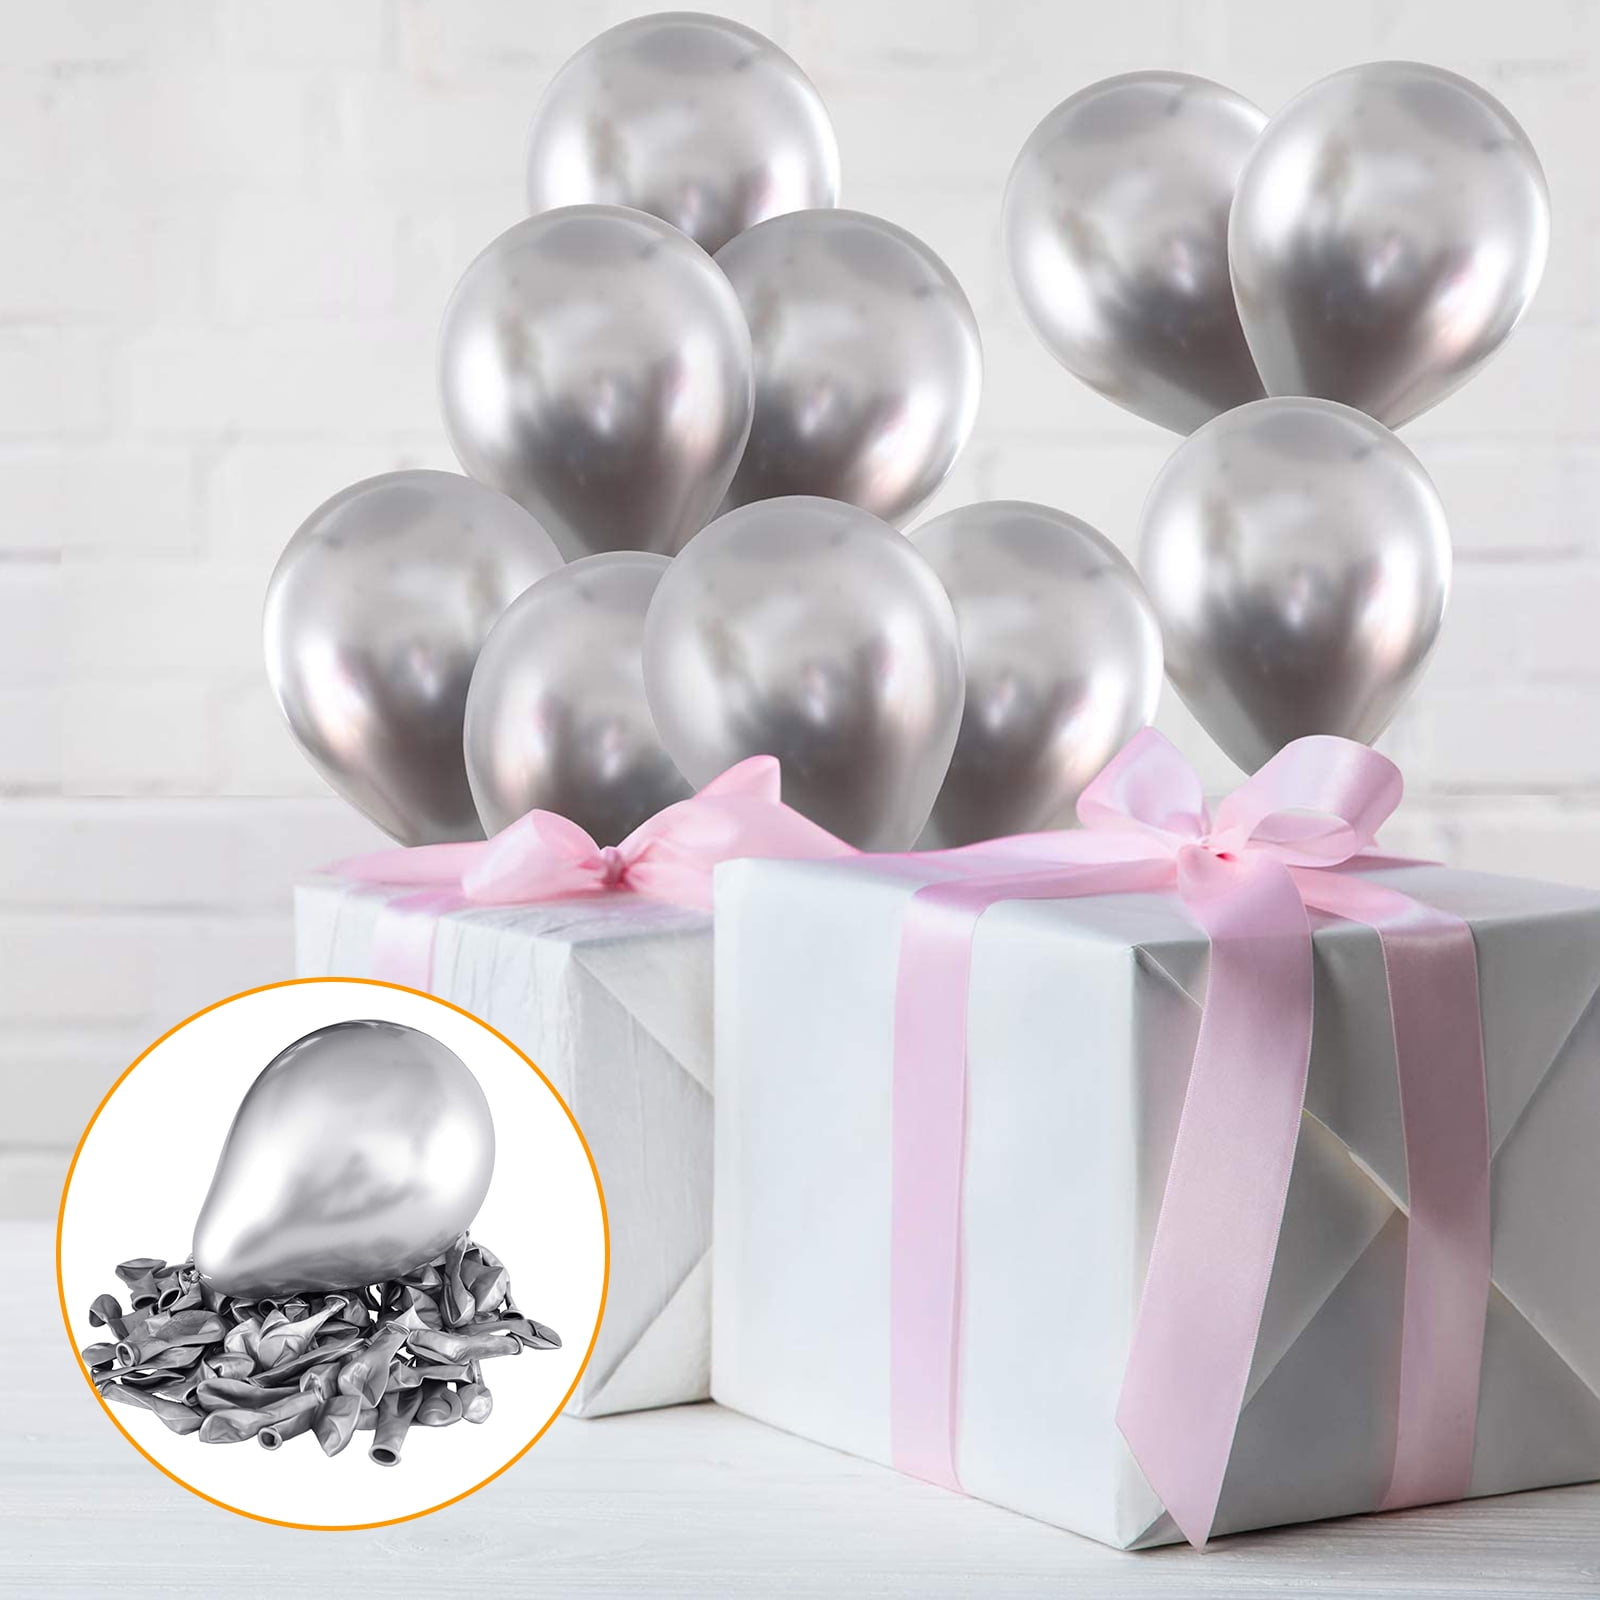 100x Metallic Balloons Chrome Shiny Latex 12" Thicken For Wedding Party Baby New